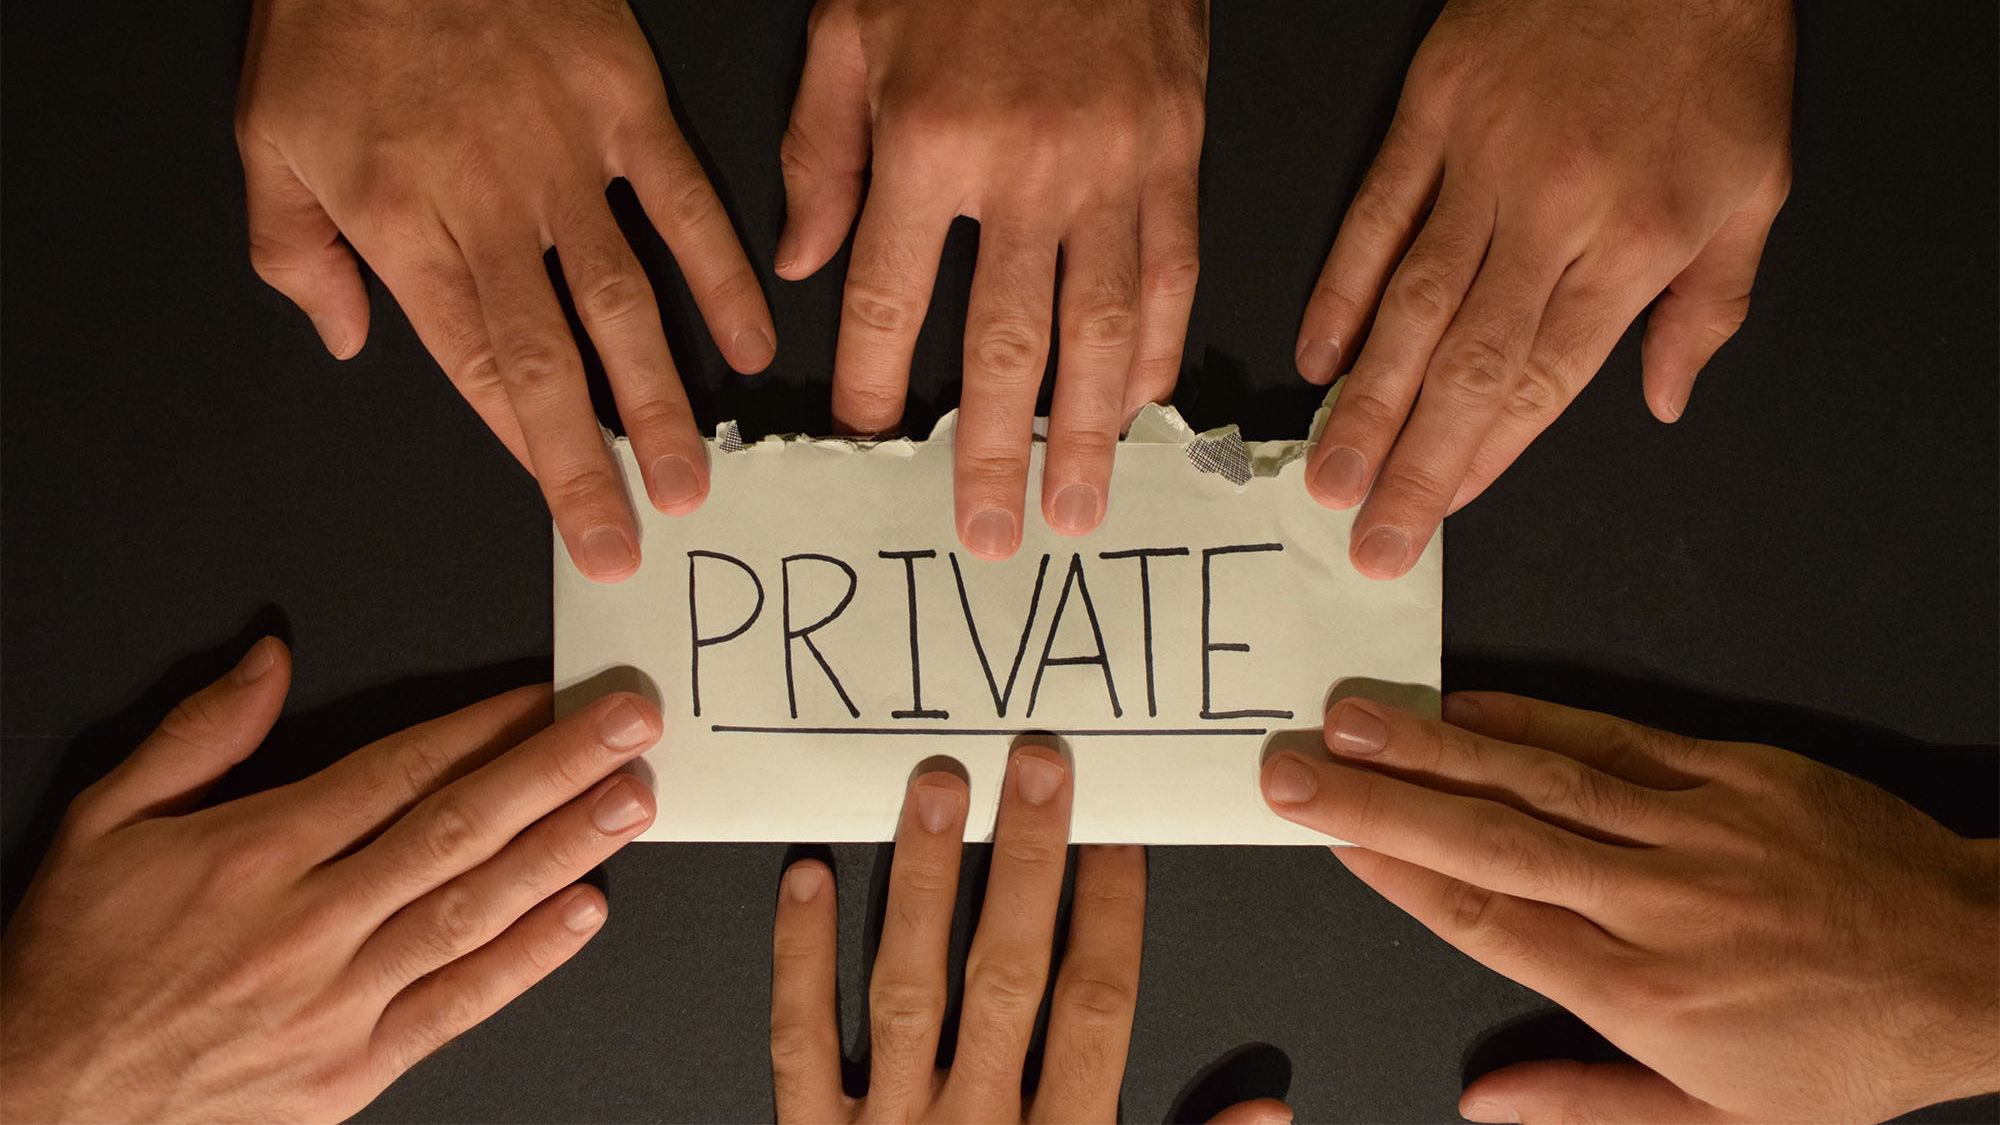 Hands grab at a private letter in this photo illustration.